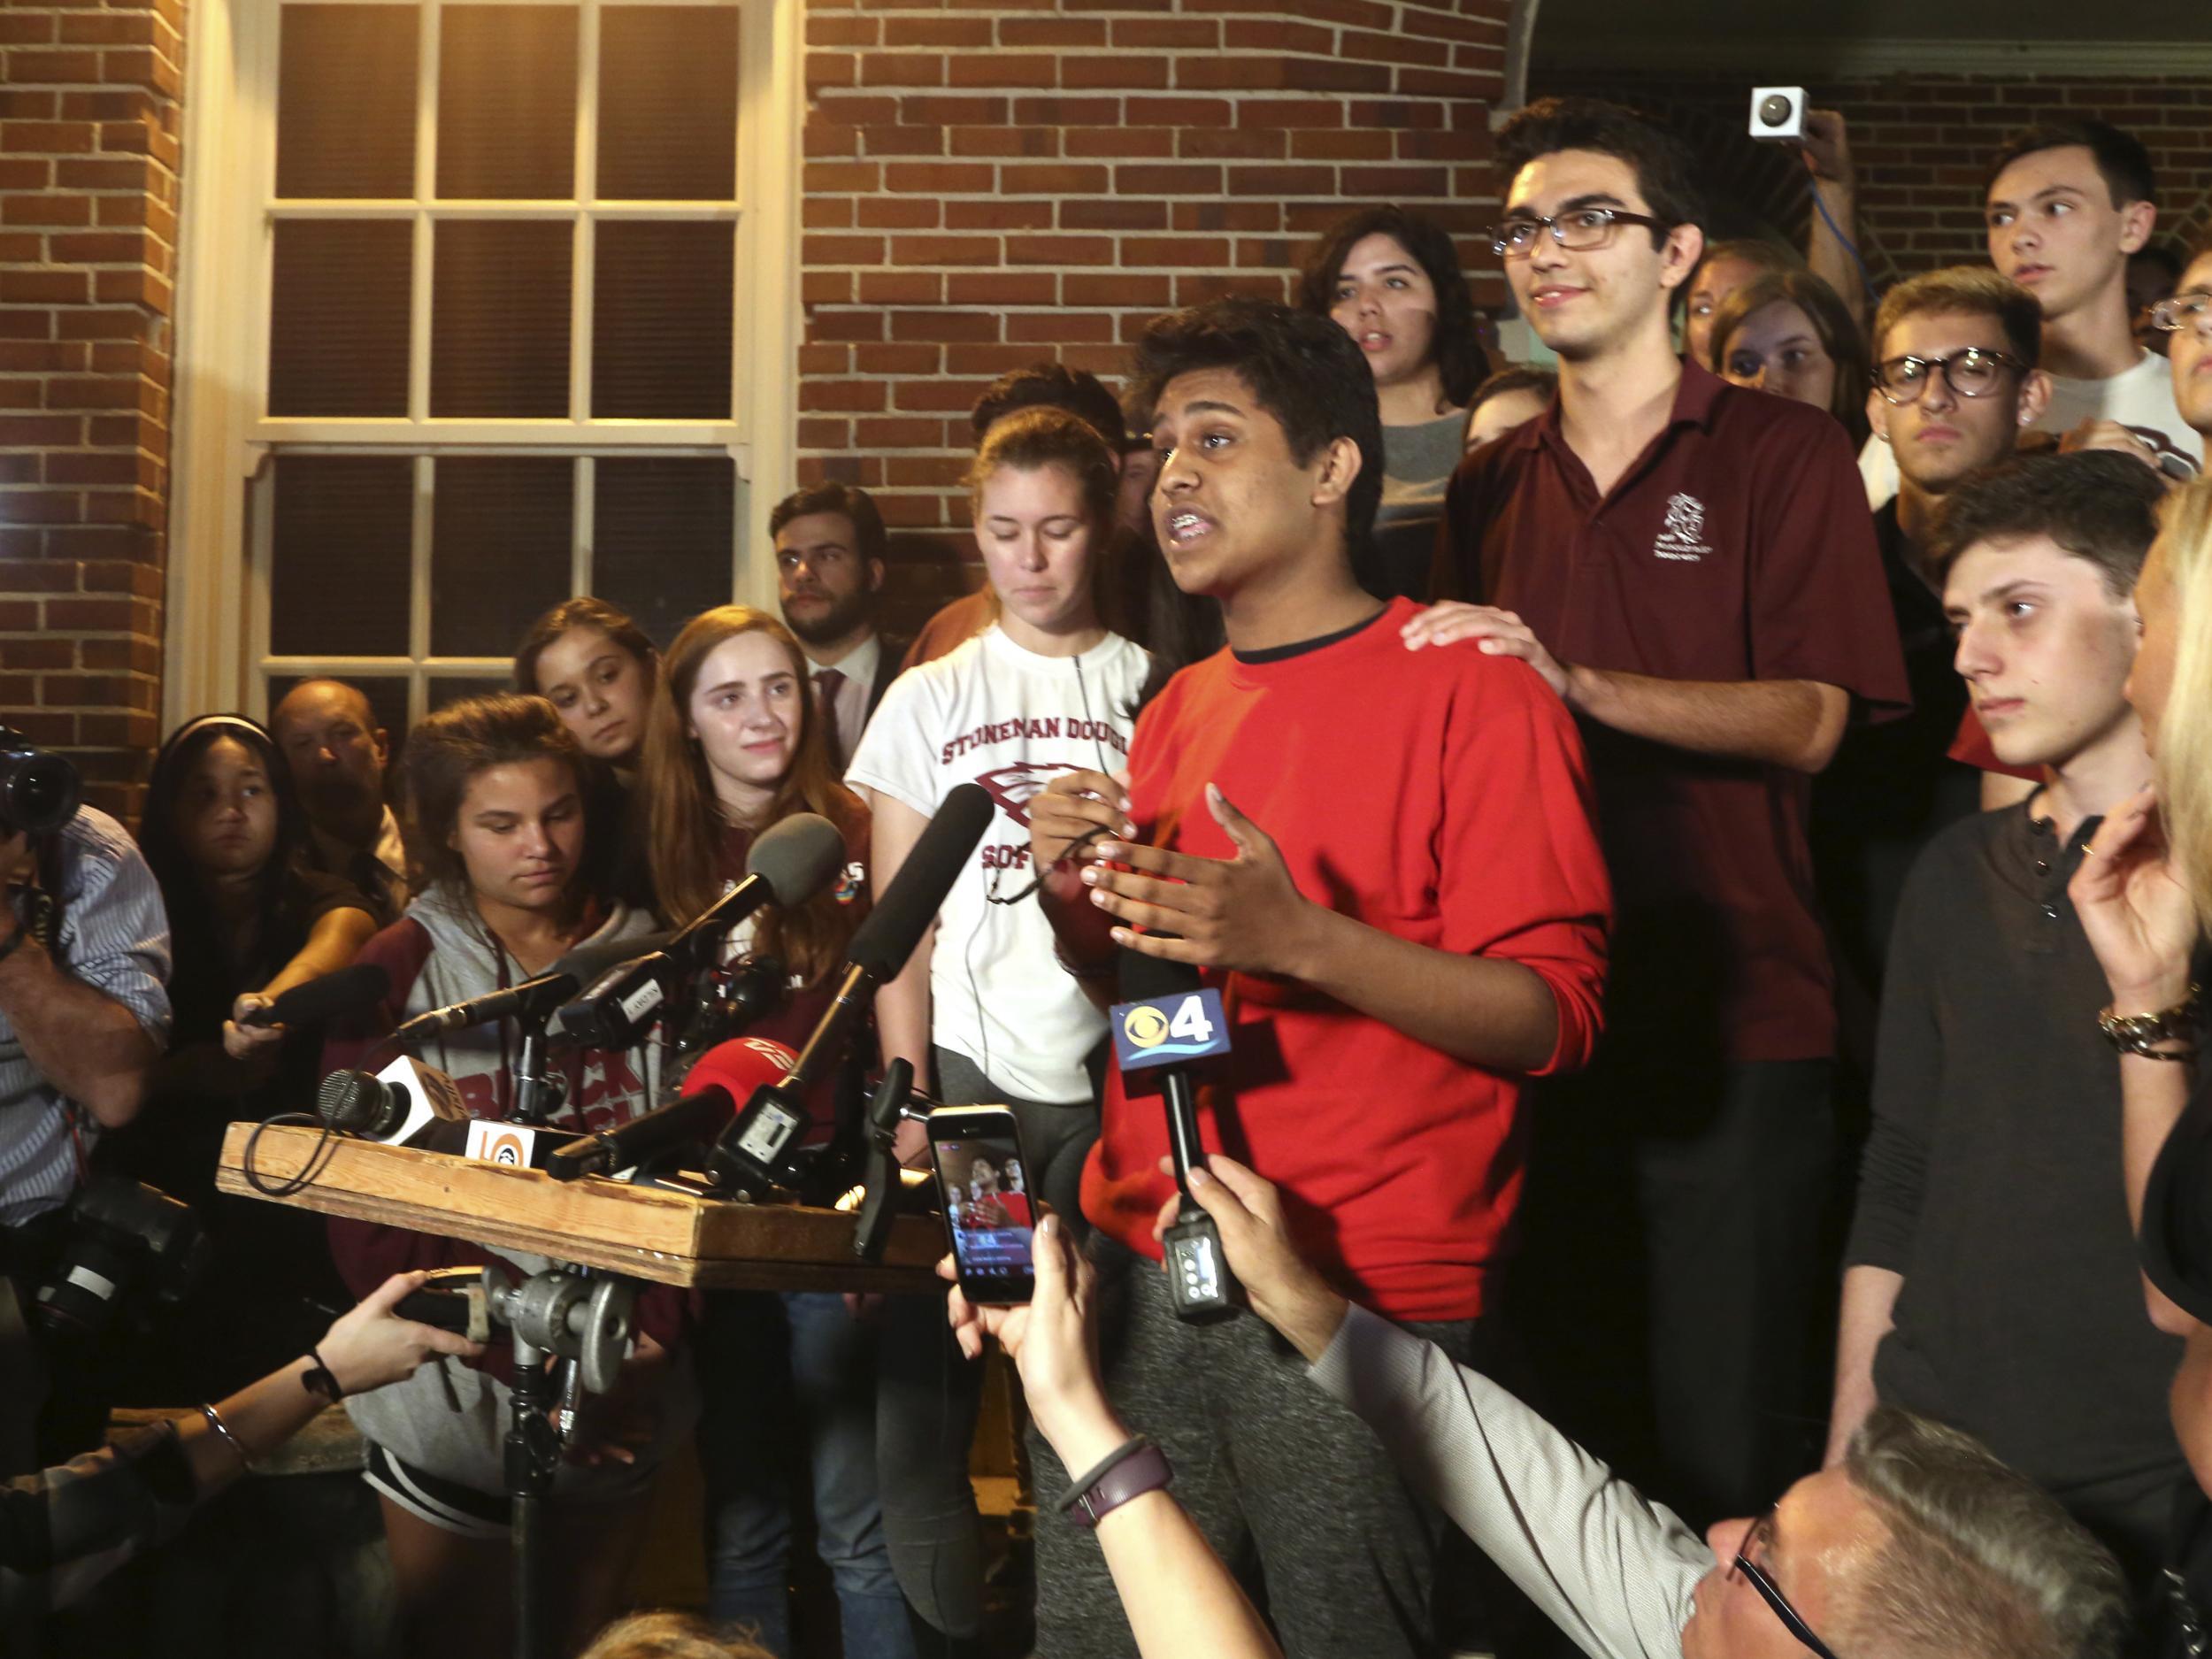 Tanzil Philip, 16, a student survivor from Marjory Stoneman Douglas High School, where 17 students and faculty were killed in a mass shooting on Wednesday, speaks to a crowd of supporters and media as they arrive at Leon High School, in Tallahassee